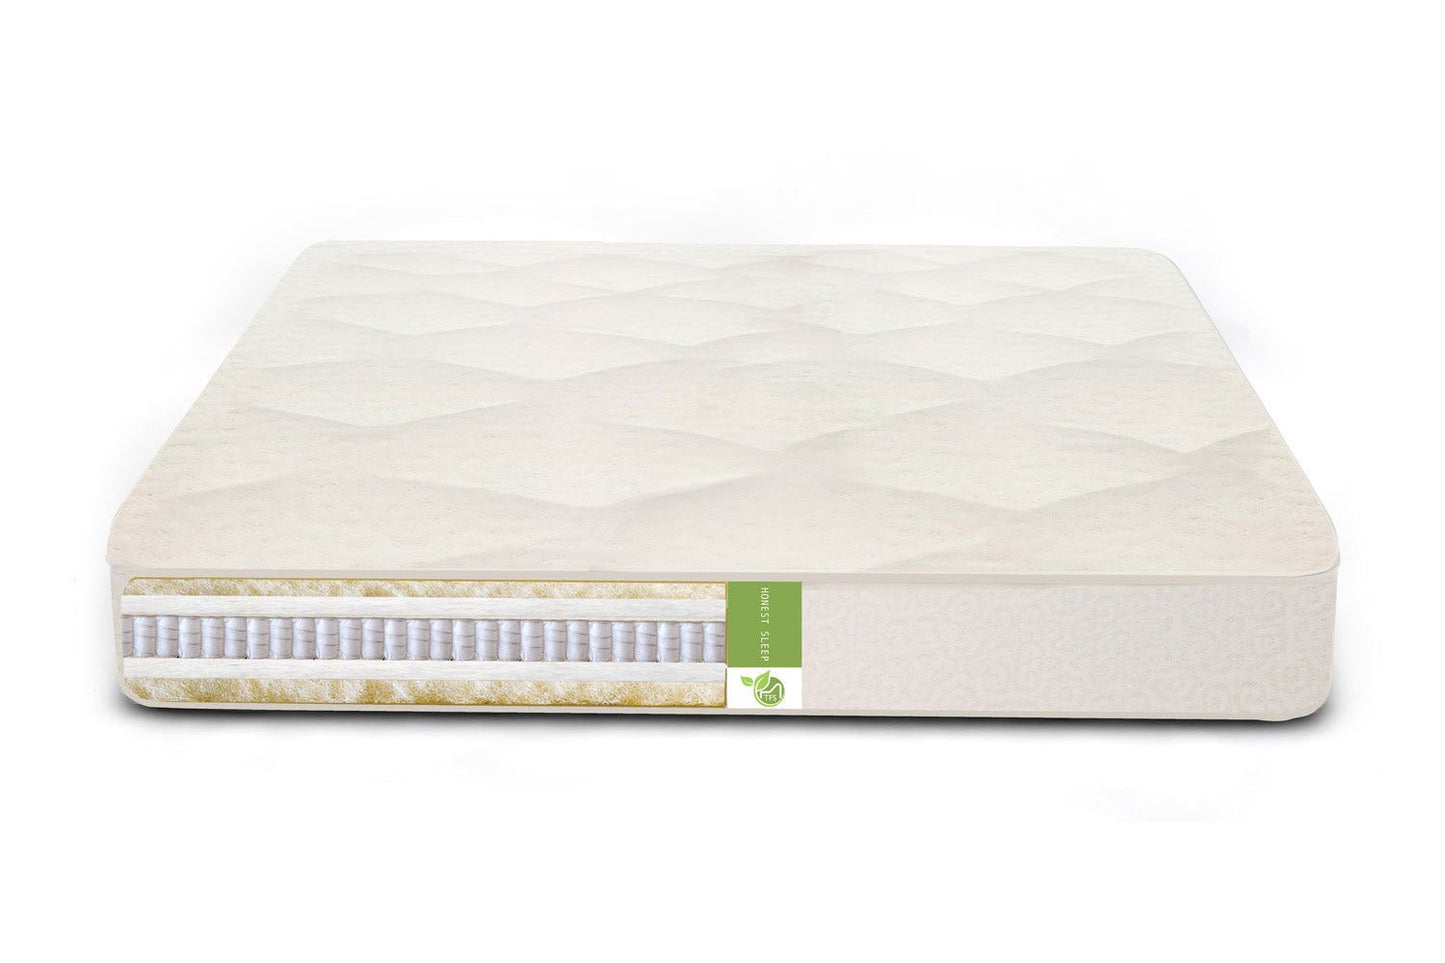 Cozy Nest Micro-Coil Organic Wool and Cotton Mattress